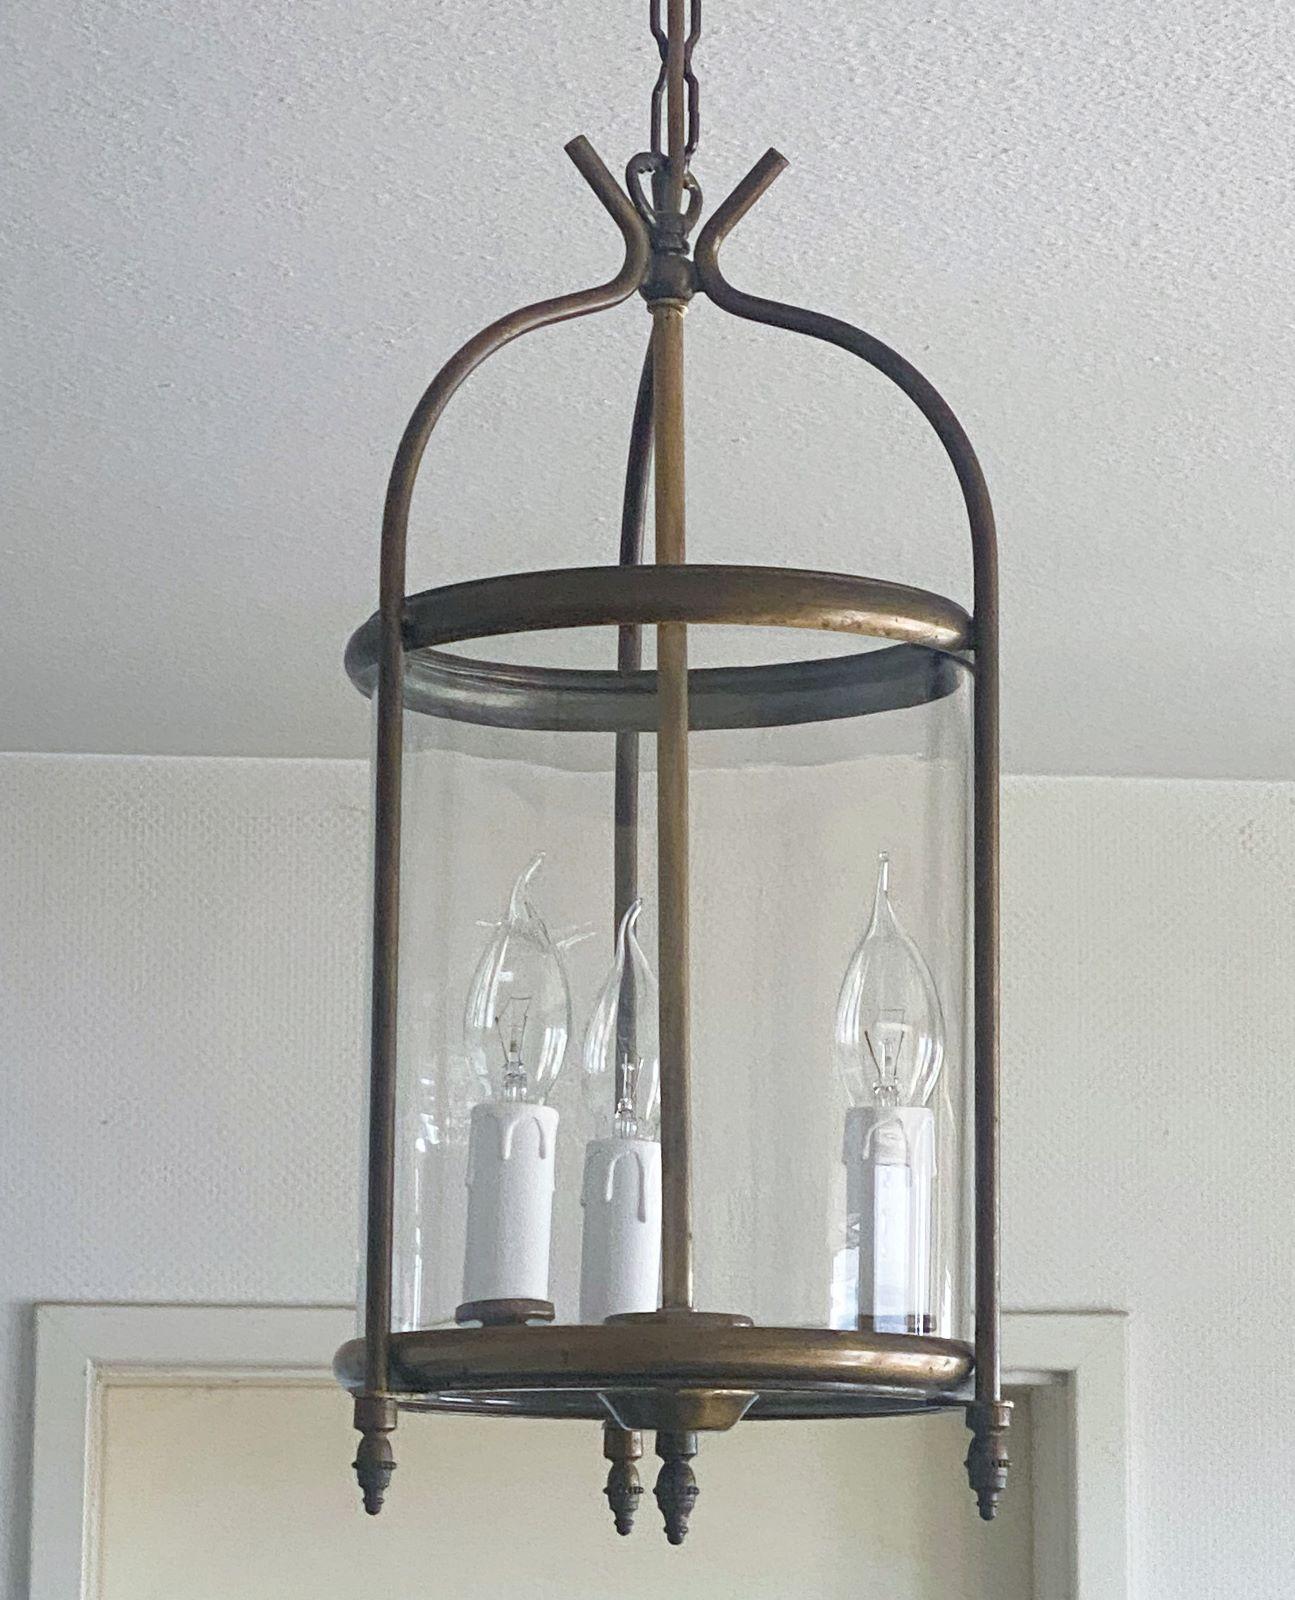 Elegant Art Deco cylindrical clear glass lantern, France, 1920-1929. Mounts of old bronze with a central three-light candelabra cluster.
In fine vintage condition, beautiful aged patina to bronze, rewired.
Three E-14 light candle bulb